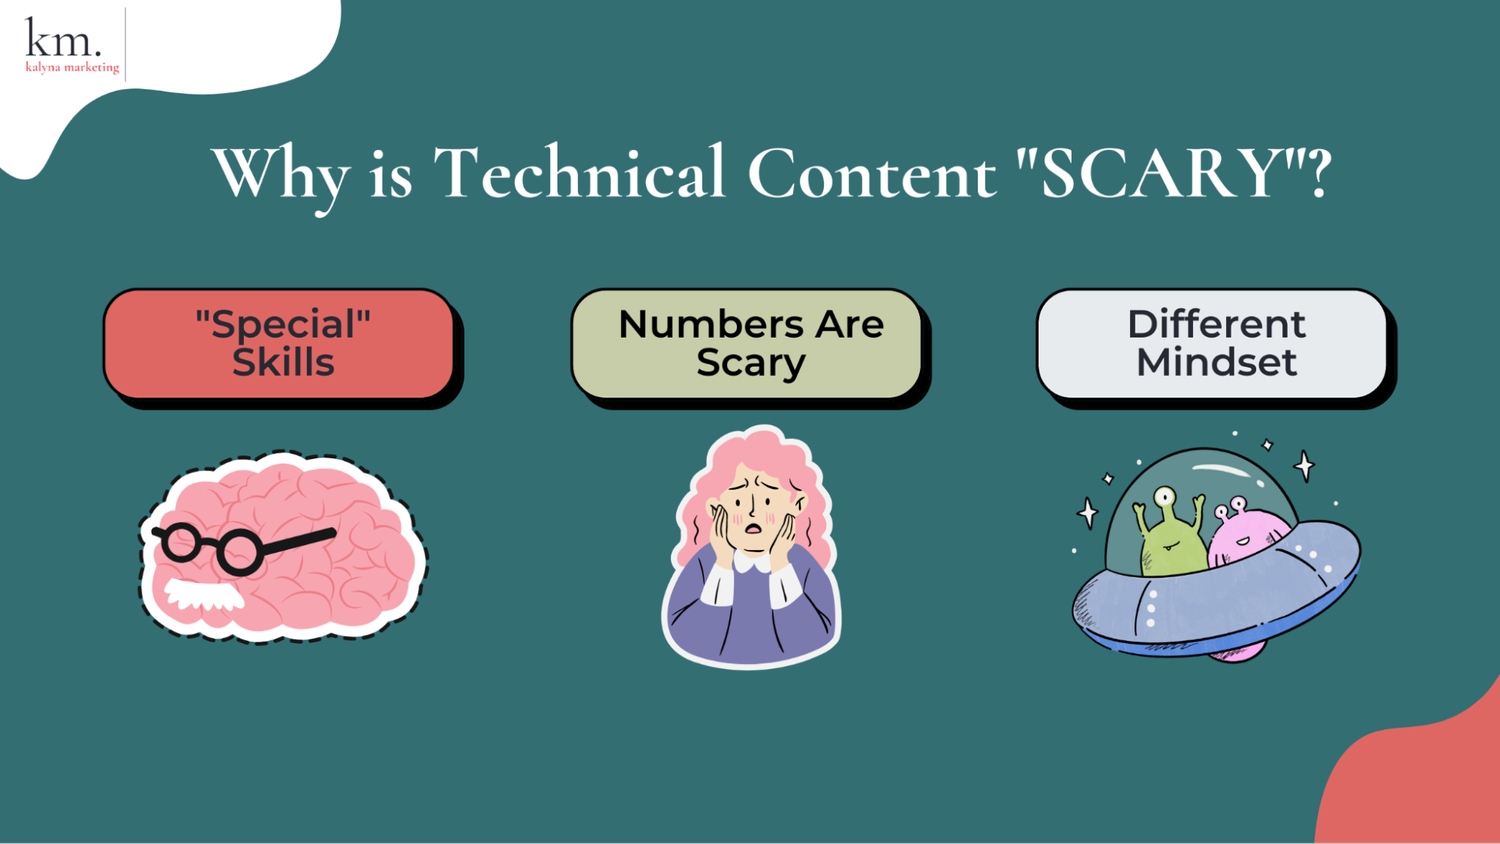 Why is Technical Content "SCARY"? "Special" Skills Numbers Are Scary Different Mindset